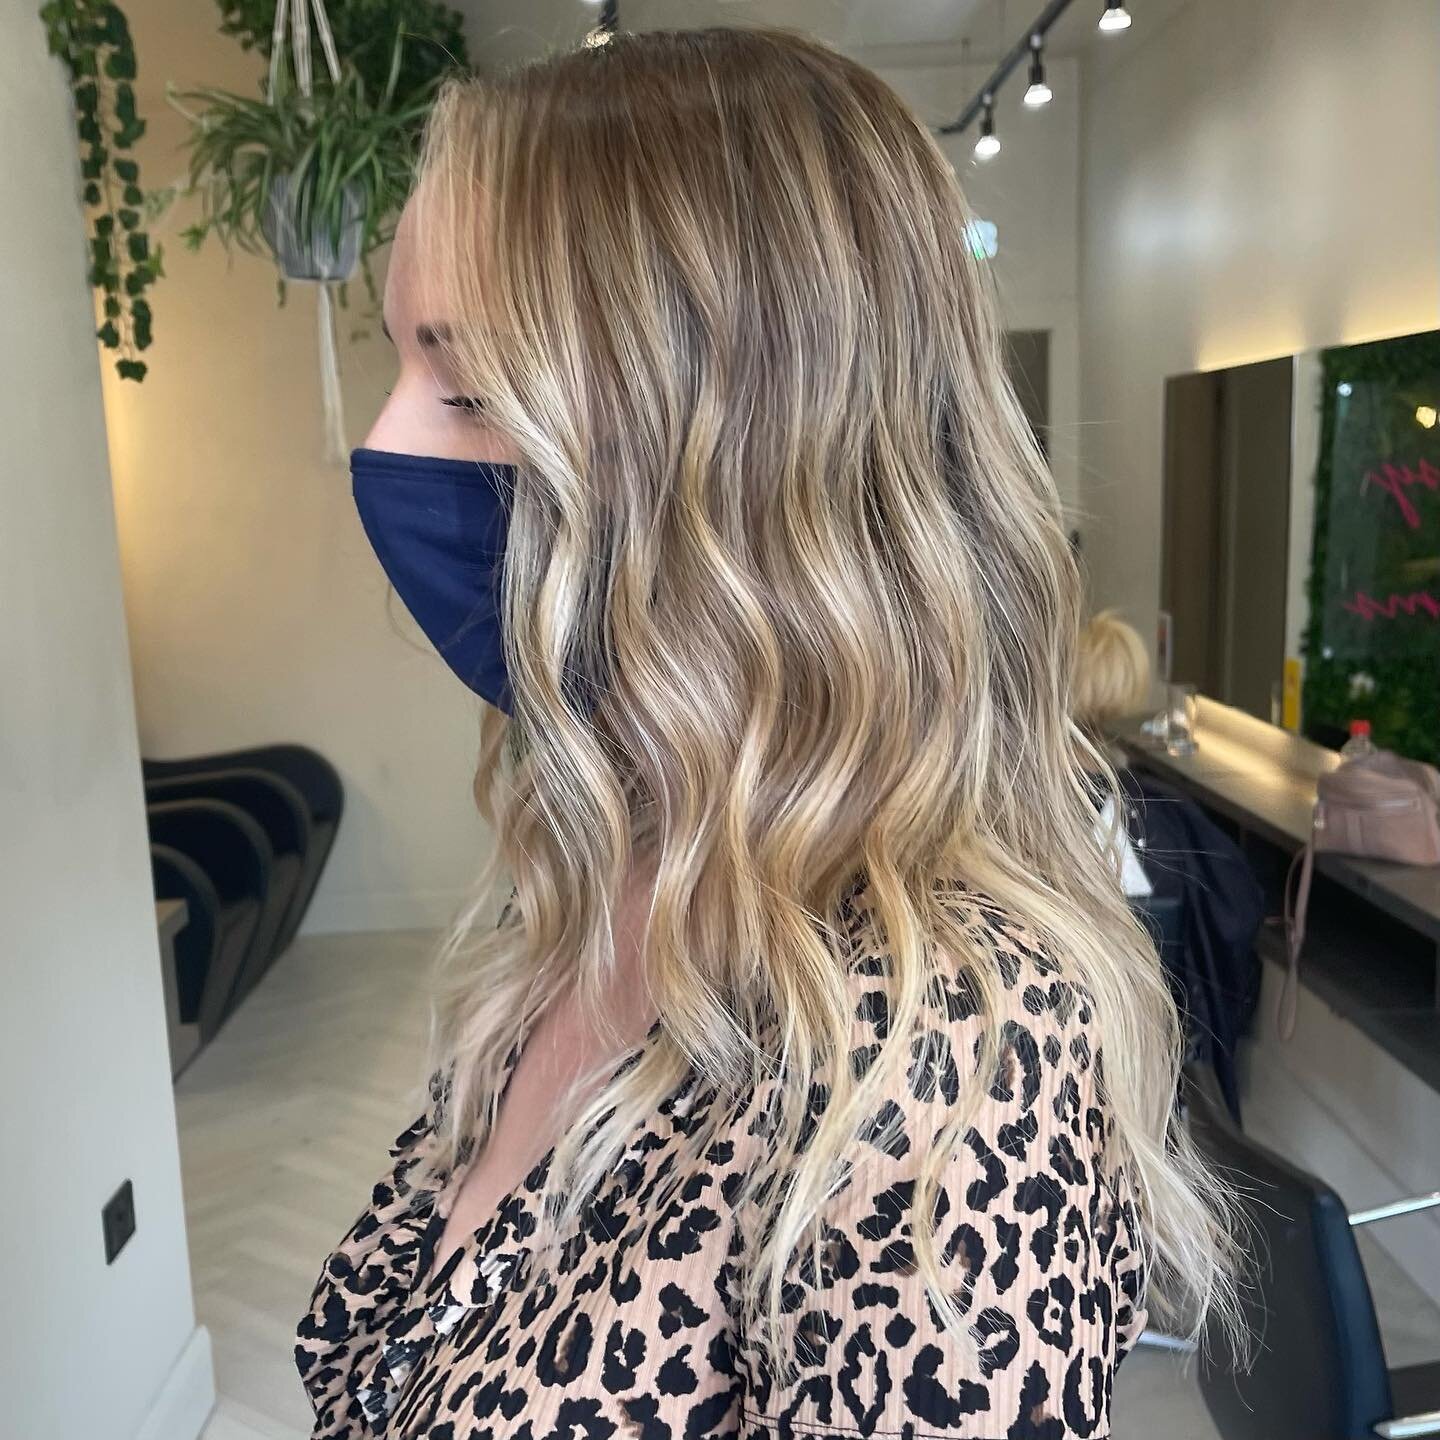 Looking at this summery and creamy babe is getting us through a gloomy midweek&hellip; ☁️☁️☁️

Who else is already missing the sunshine? ☀️☀️☀️

Major transformation by @louise_christopherbennett - check out the before!

#hair #hairstyles #blondehair